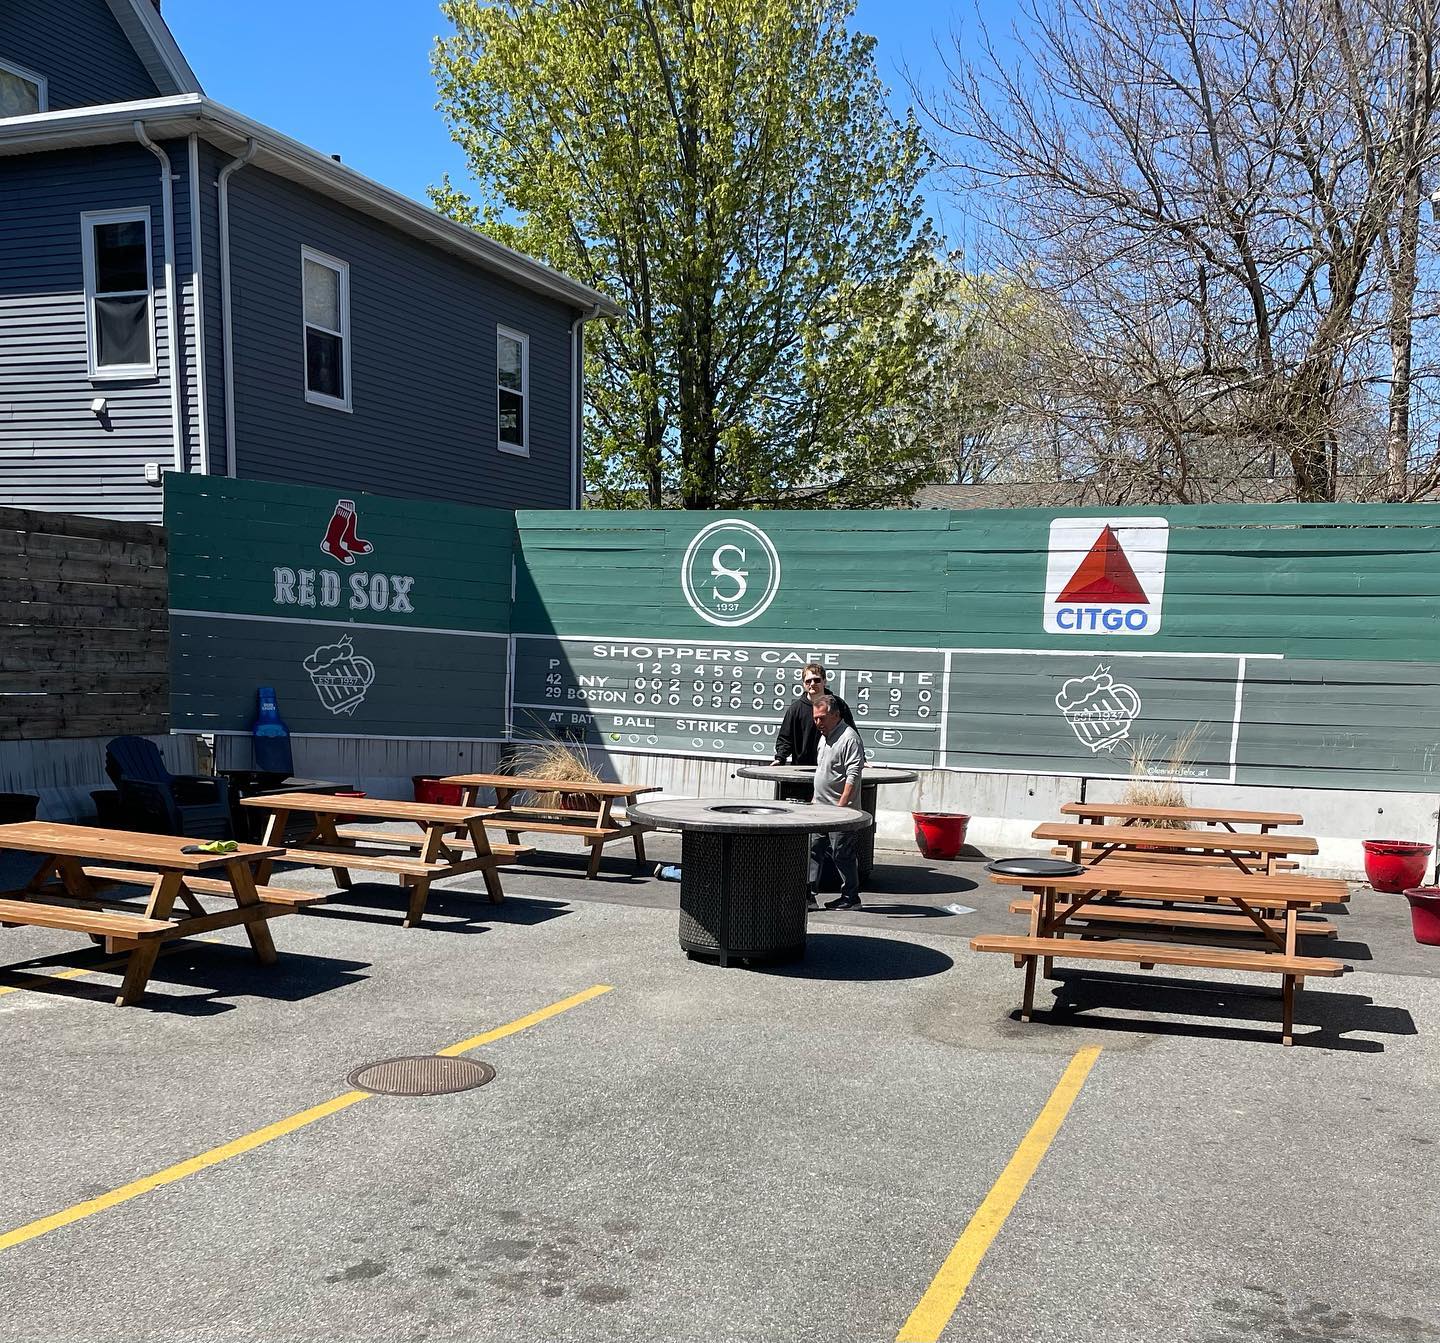 Patio Preview!So close to being ready!Now all we need is great weather! ️